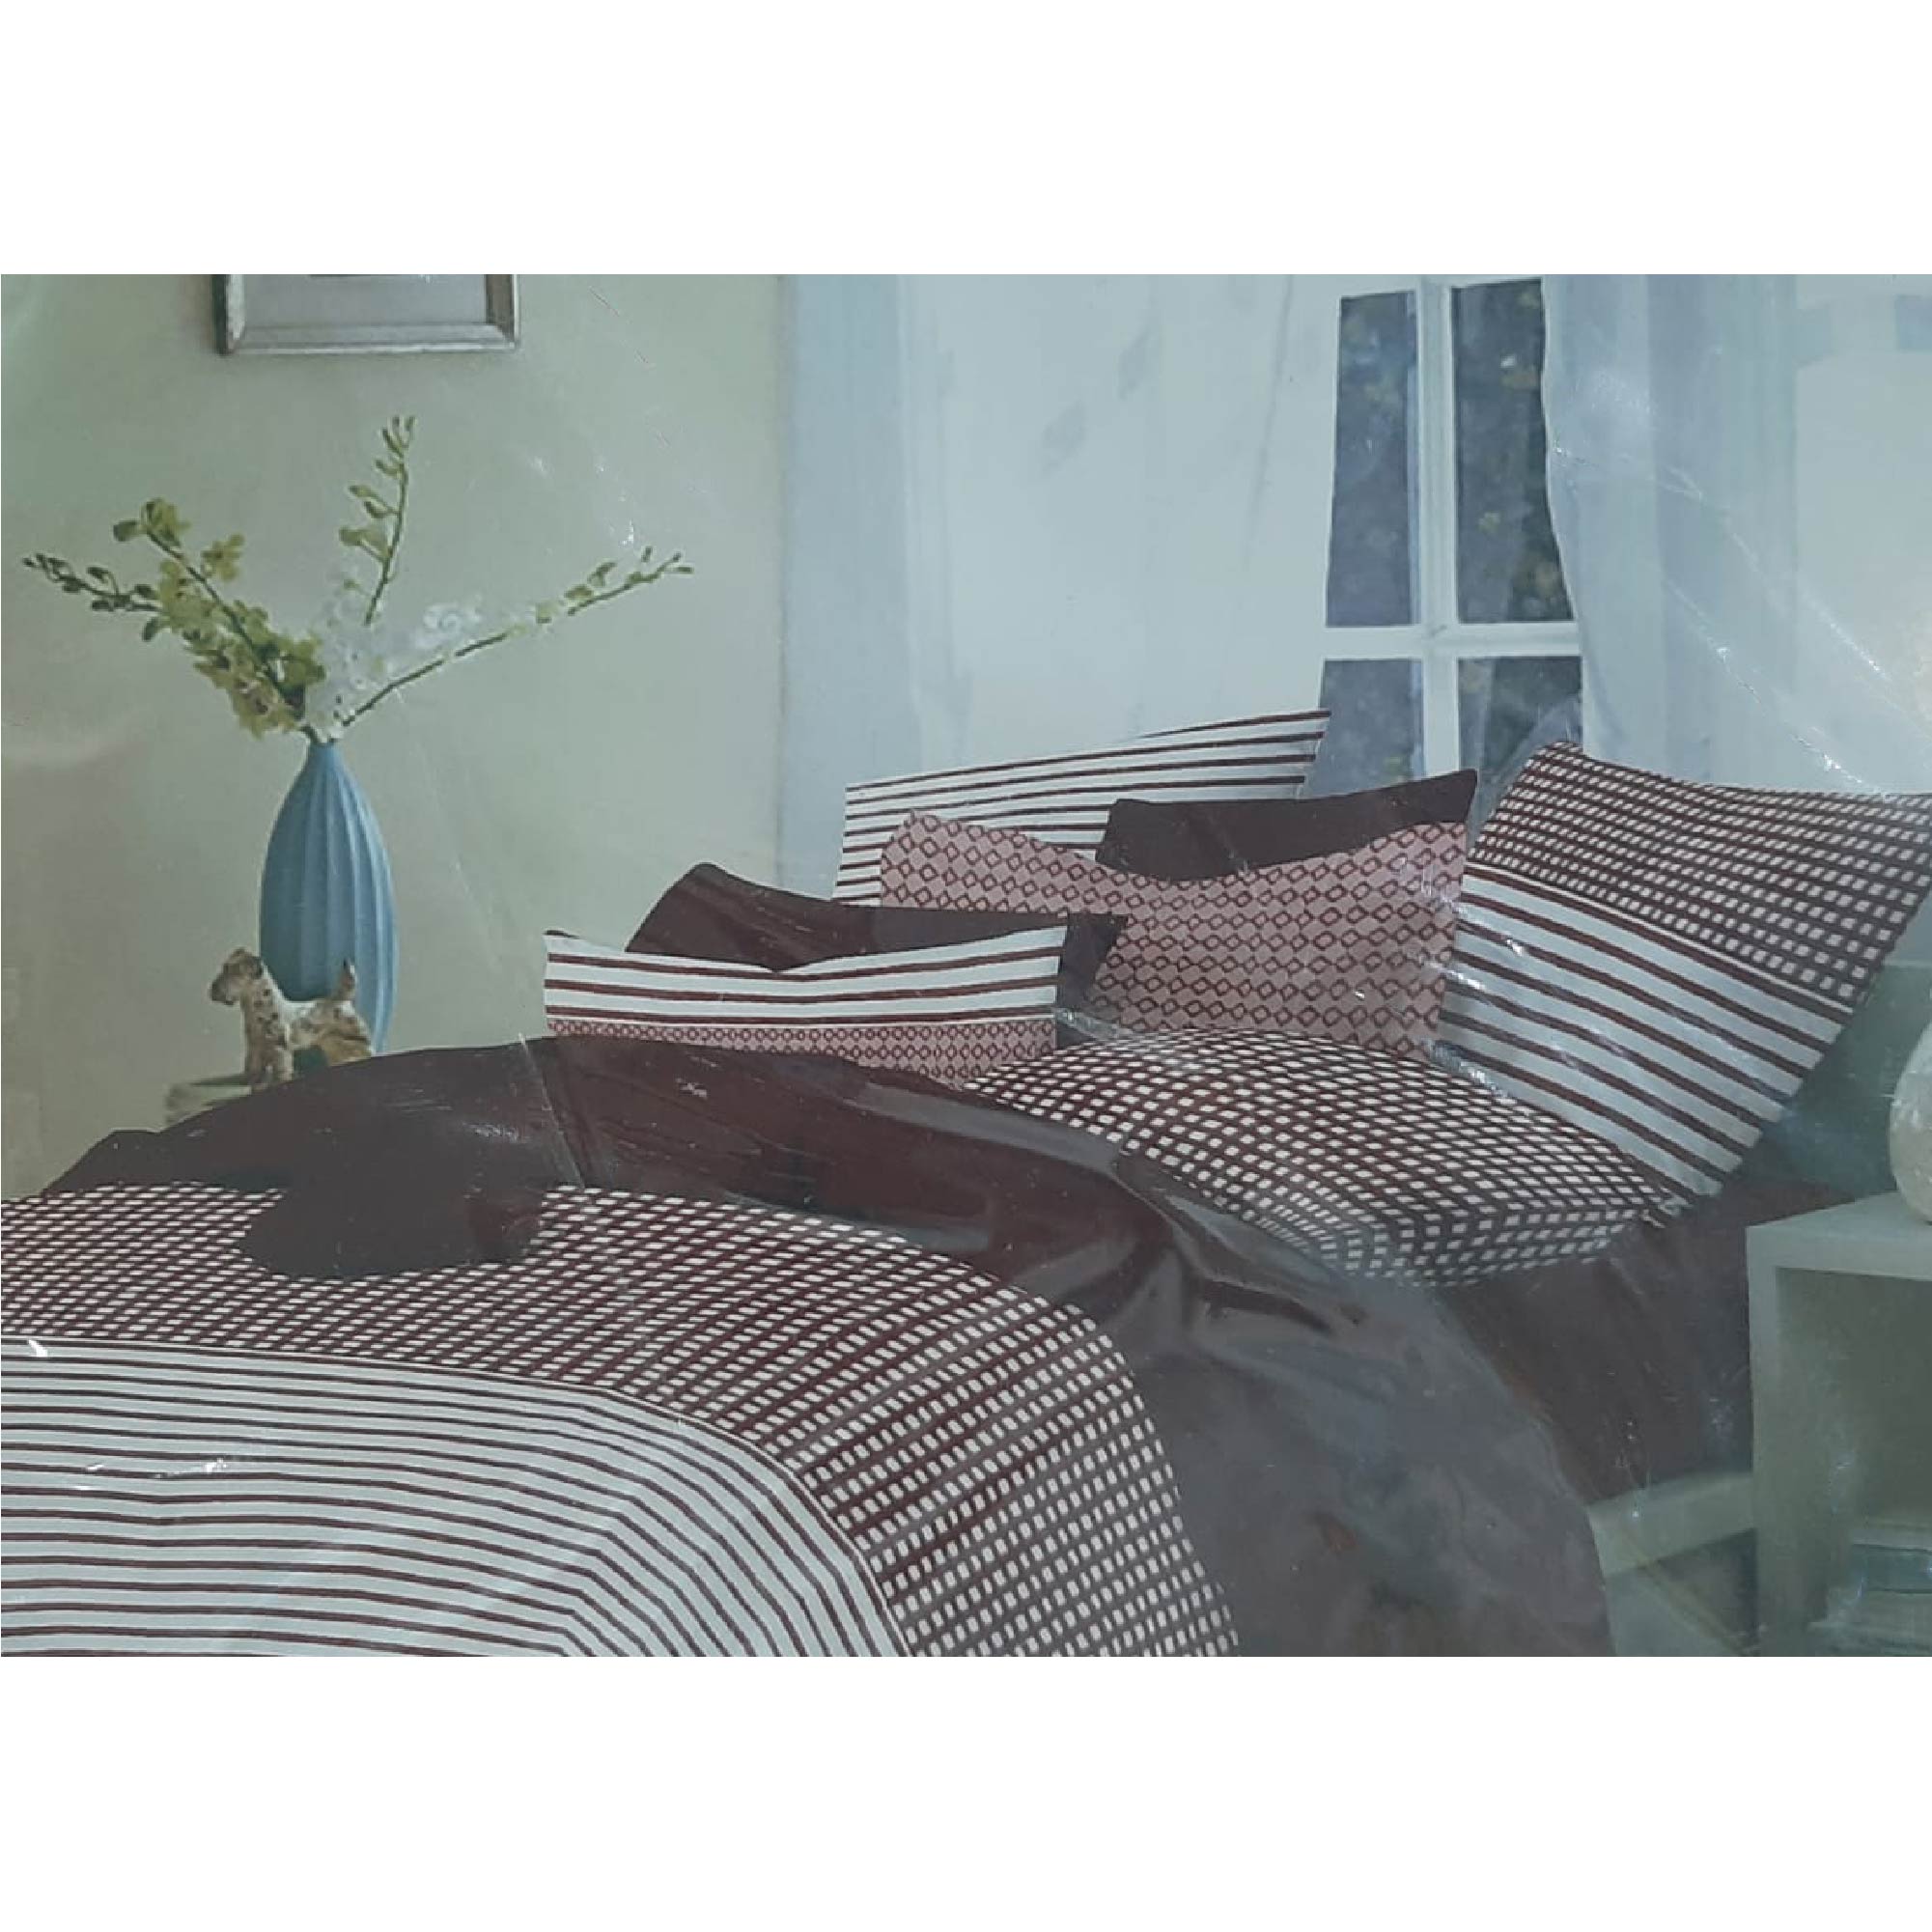 Windsor Bordo/White Luxury Bed Linen Collection Single, WIN-8391BW